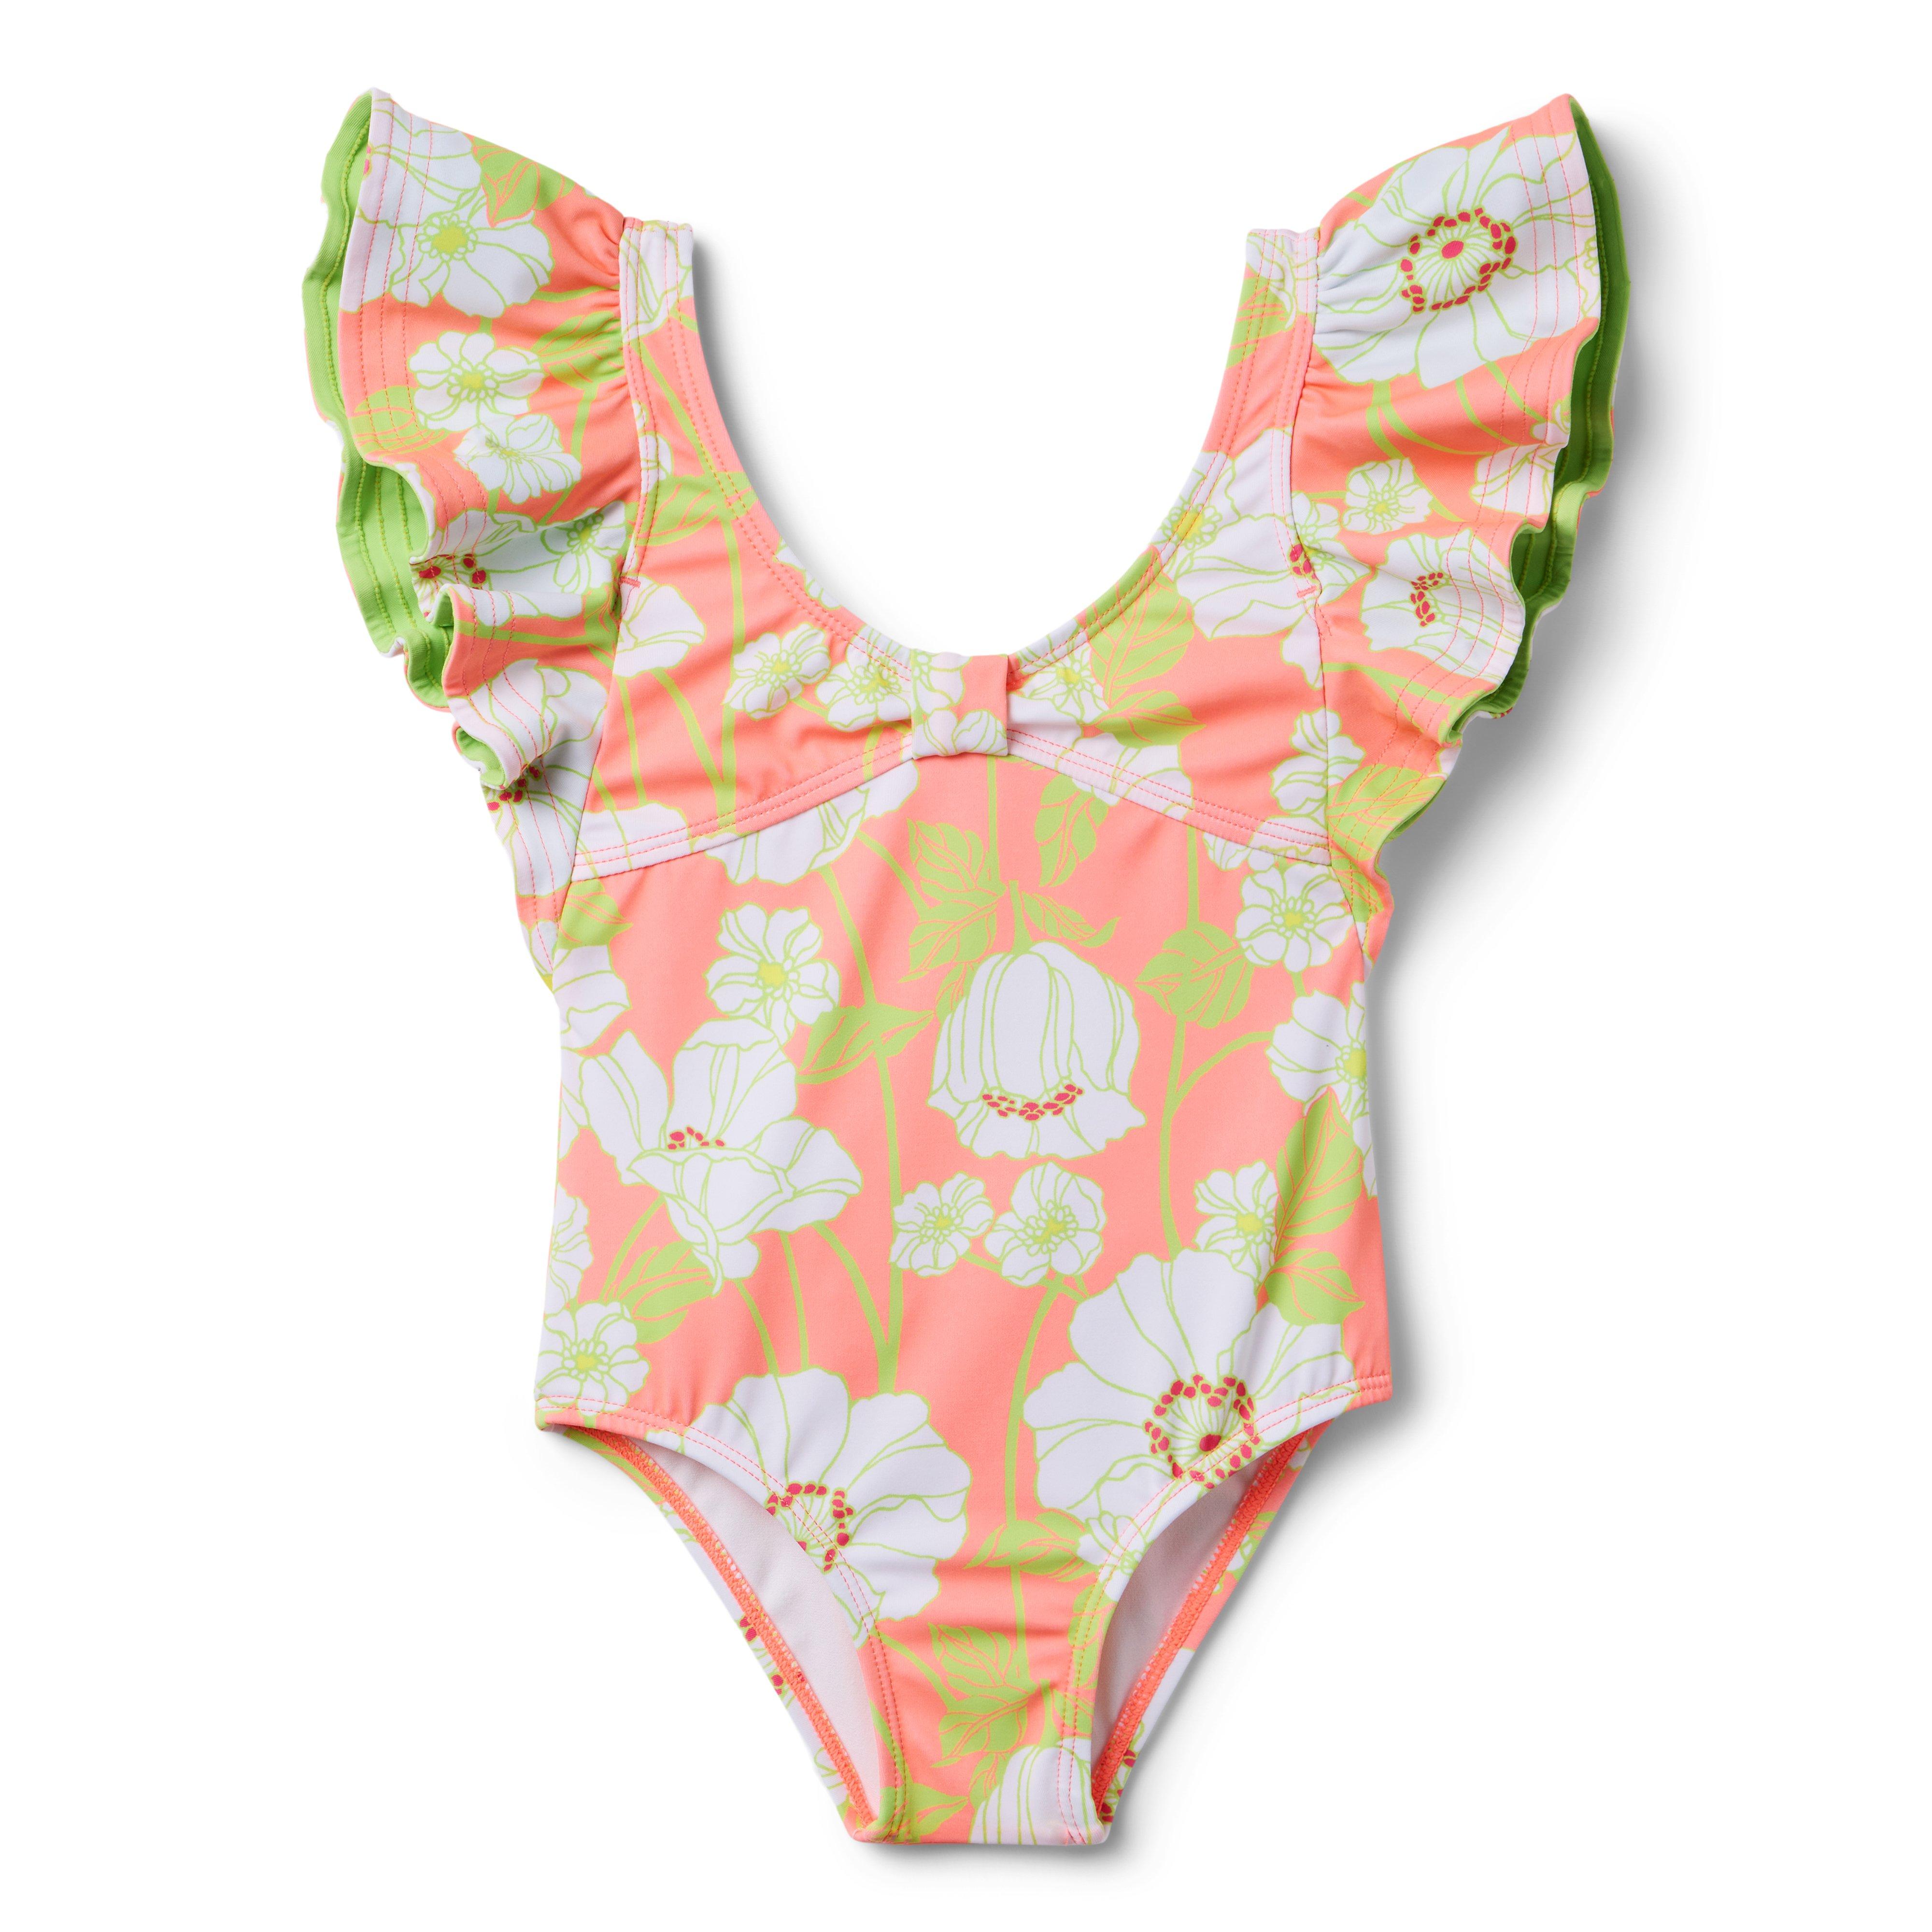 Recycled Floral Ruffle Swimsuit